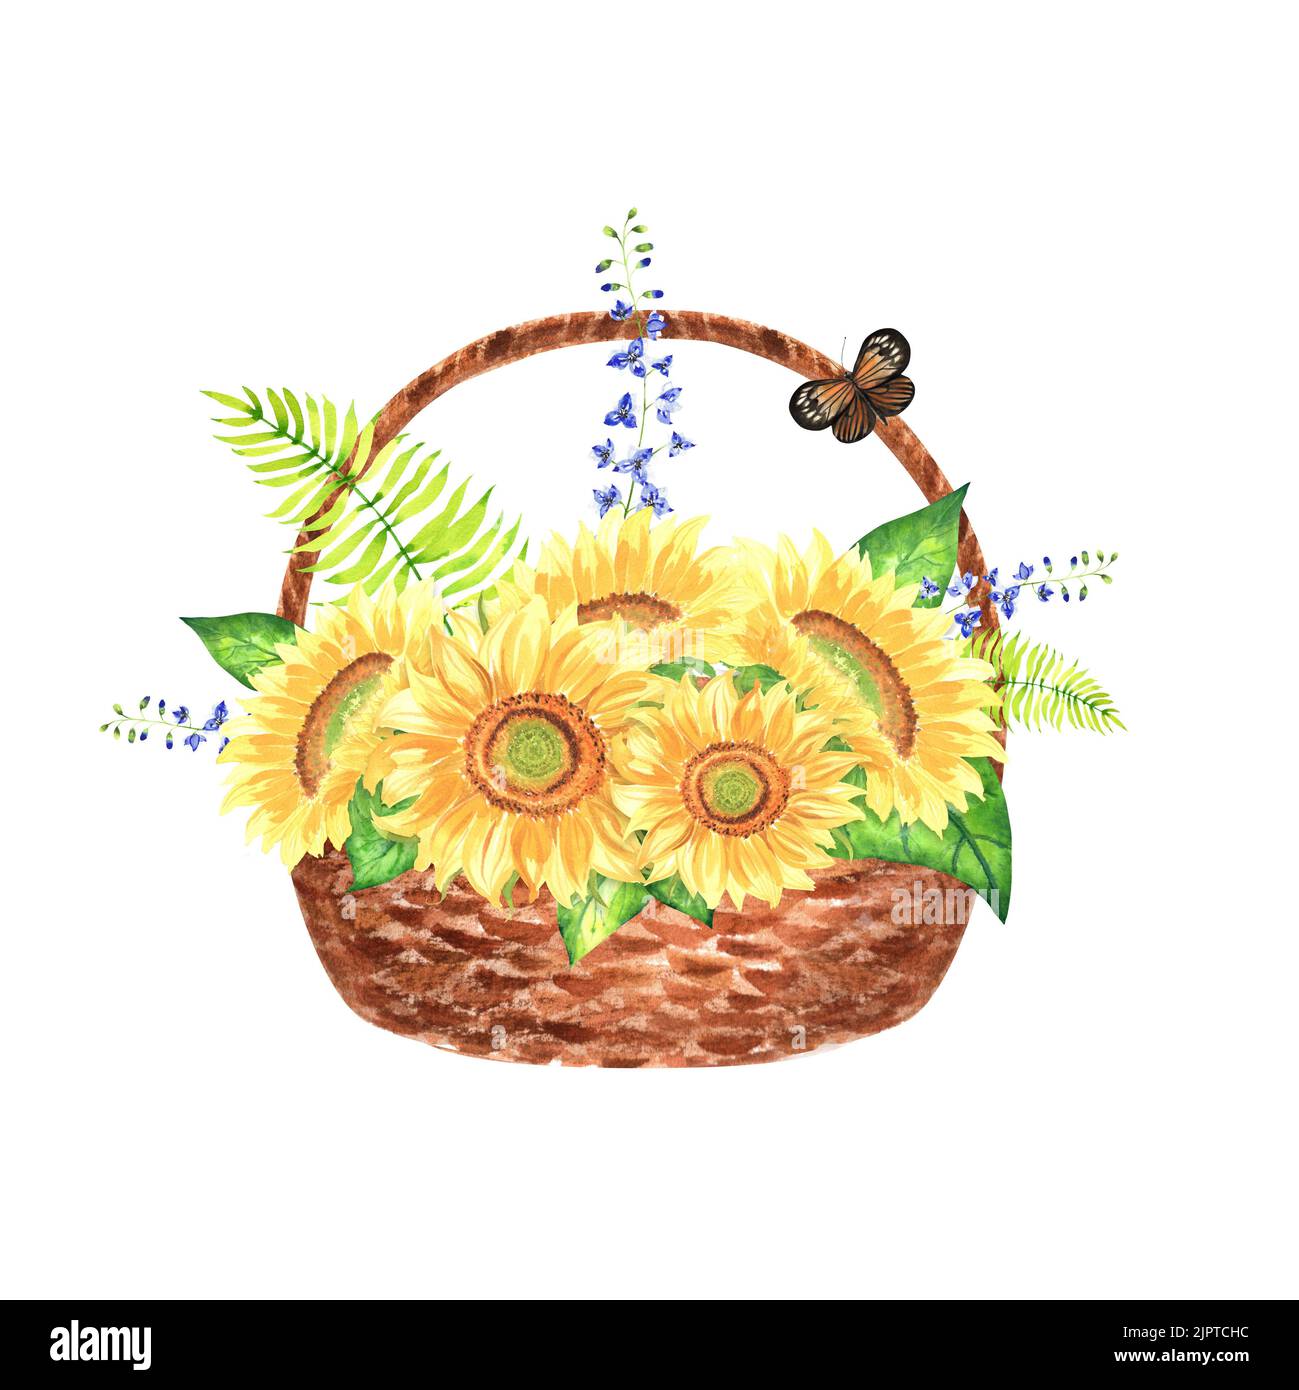 Watercolour illustration. A basket full of bright sunflowers and ferns with delphinium. Hand-painted composition. Can be used for printing cards, invi Stock Photo